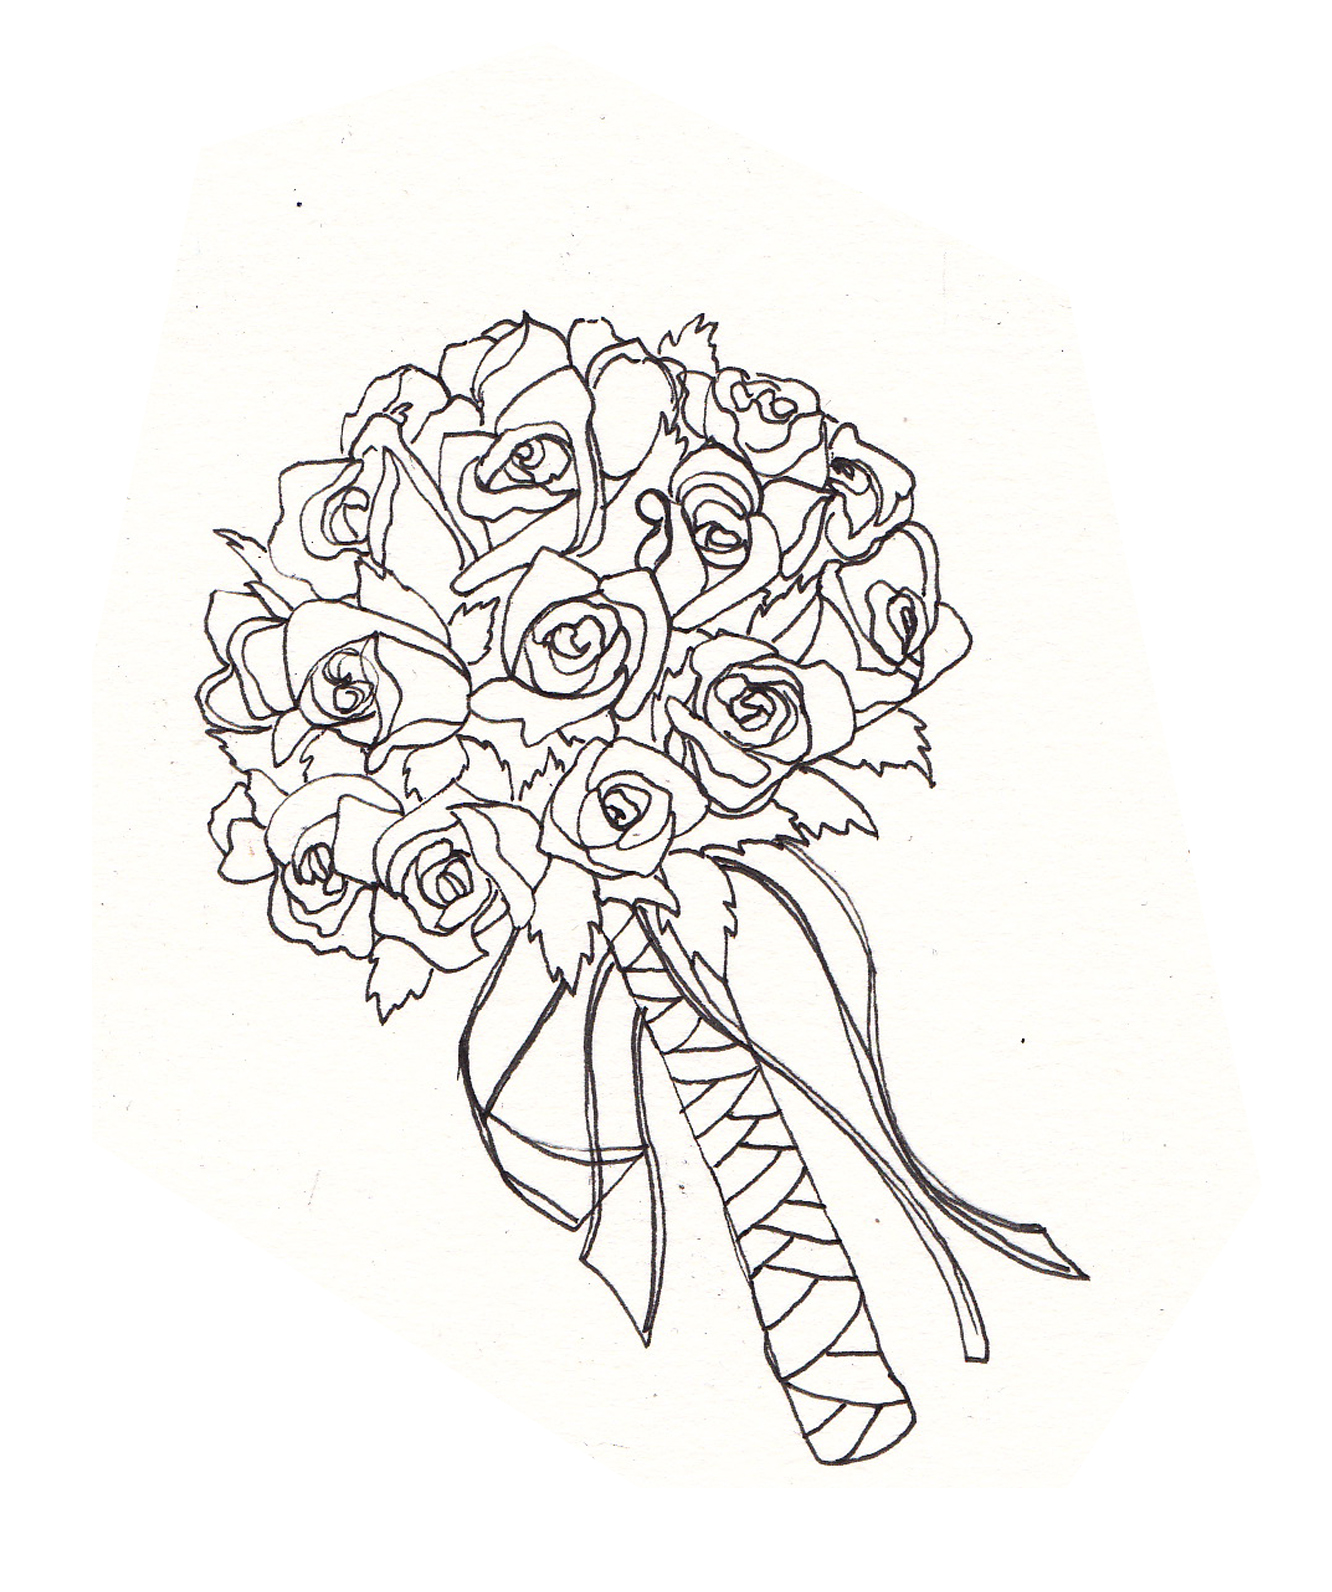 Wedding Bouquet Drawing at GetDrawings.com | Free for personal use